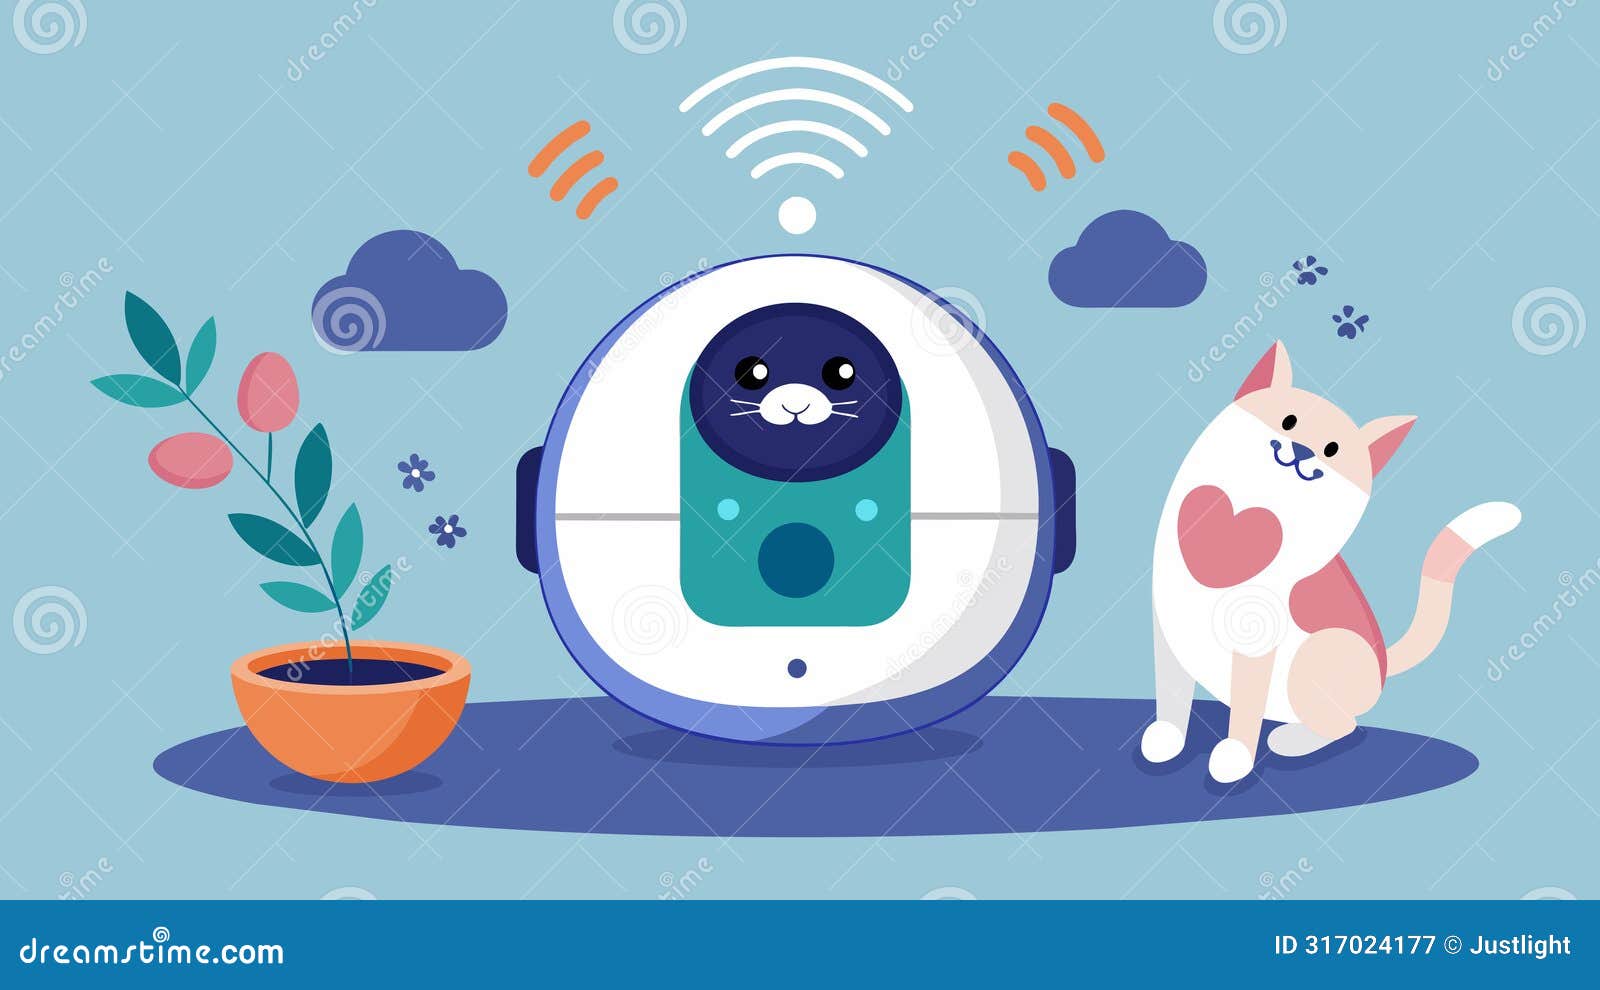 a smart petsitting device that can simulate your pets natural surroundings and play calming sounds to reduce separation